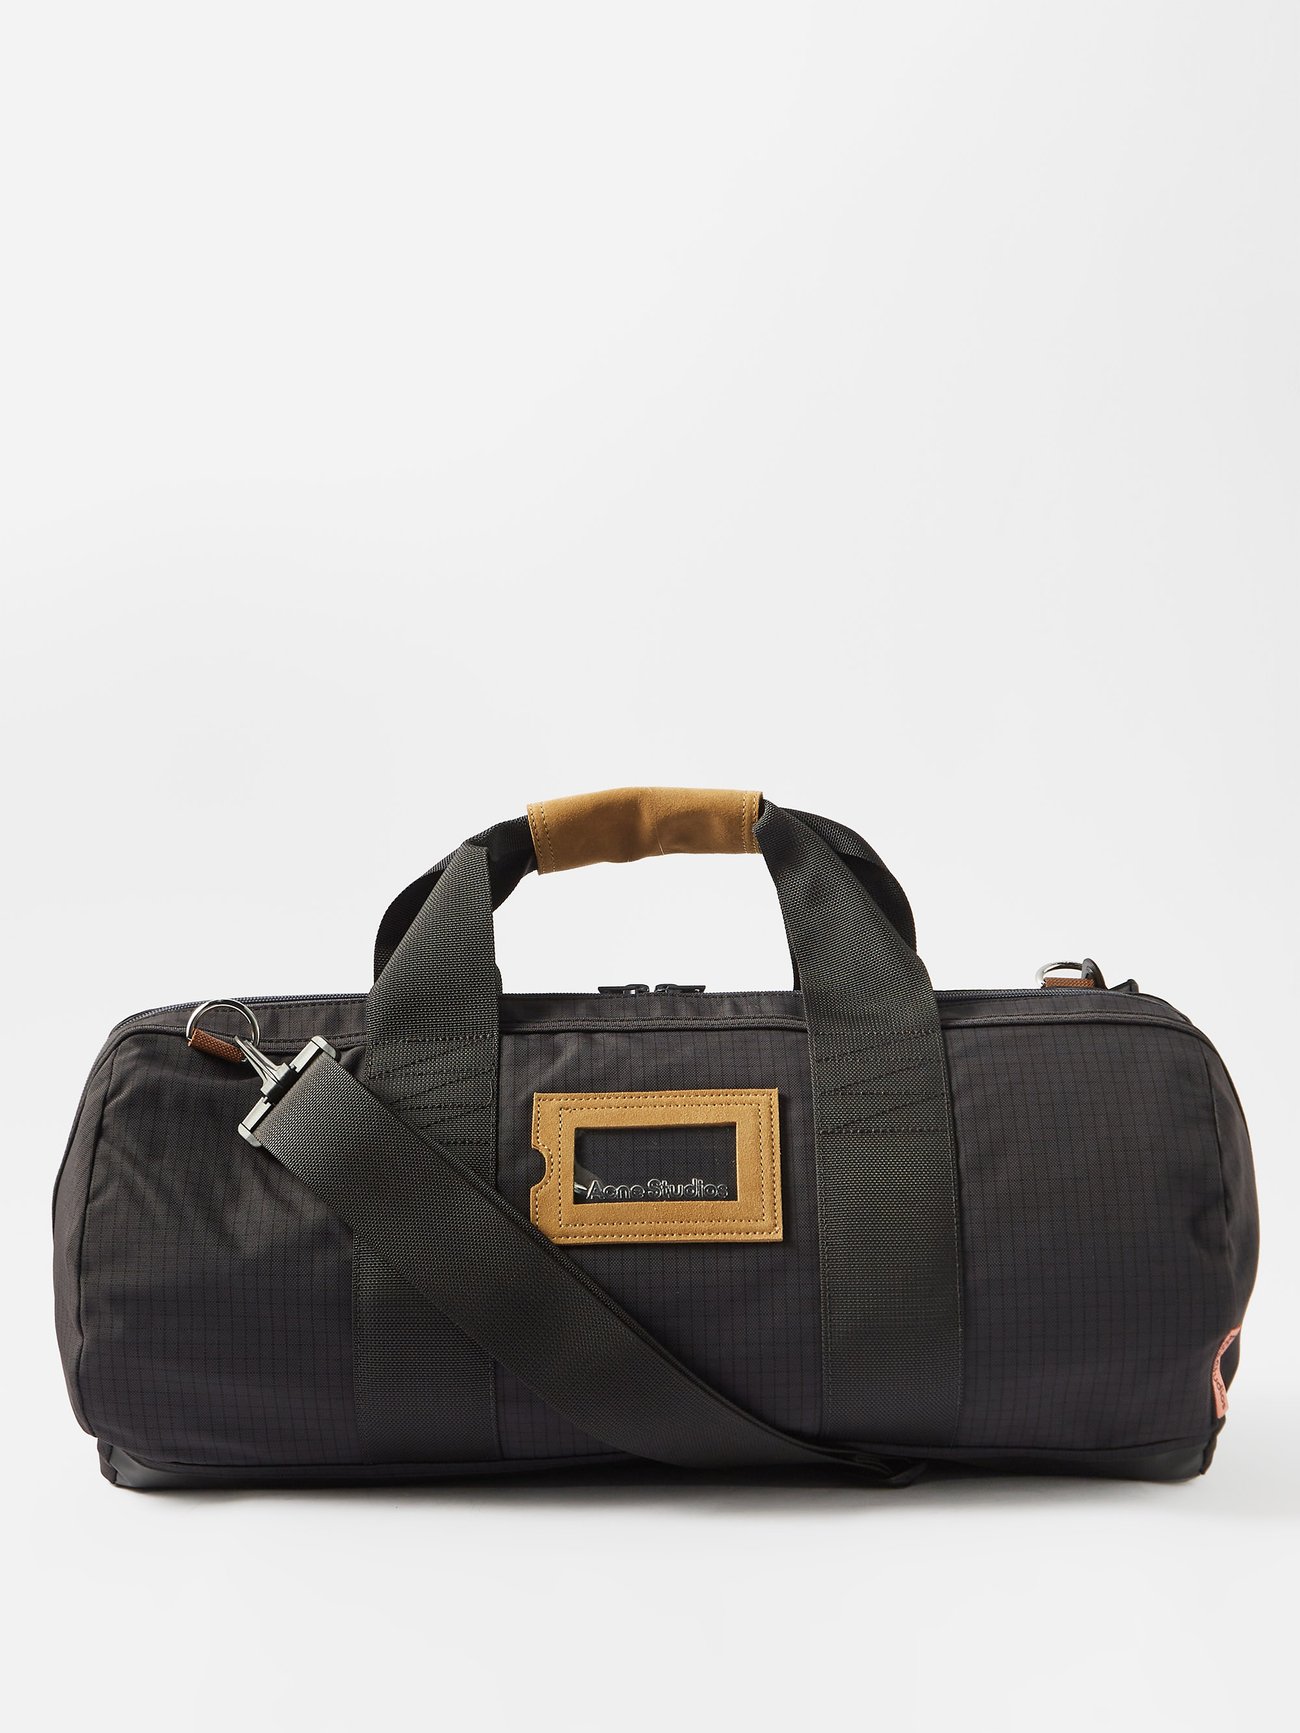 Mens Black Suede-trimmed Ripstop Duffel Bag MATCHESFASHION Men Accessories Bags Travel Bags 